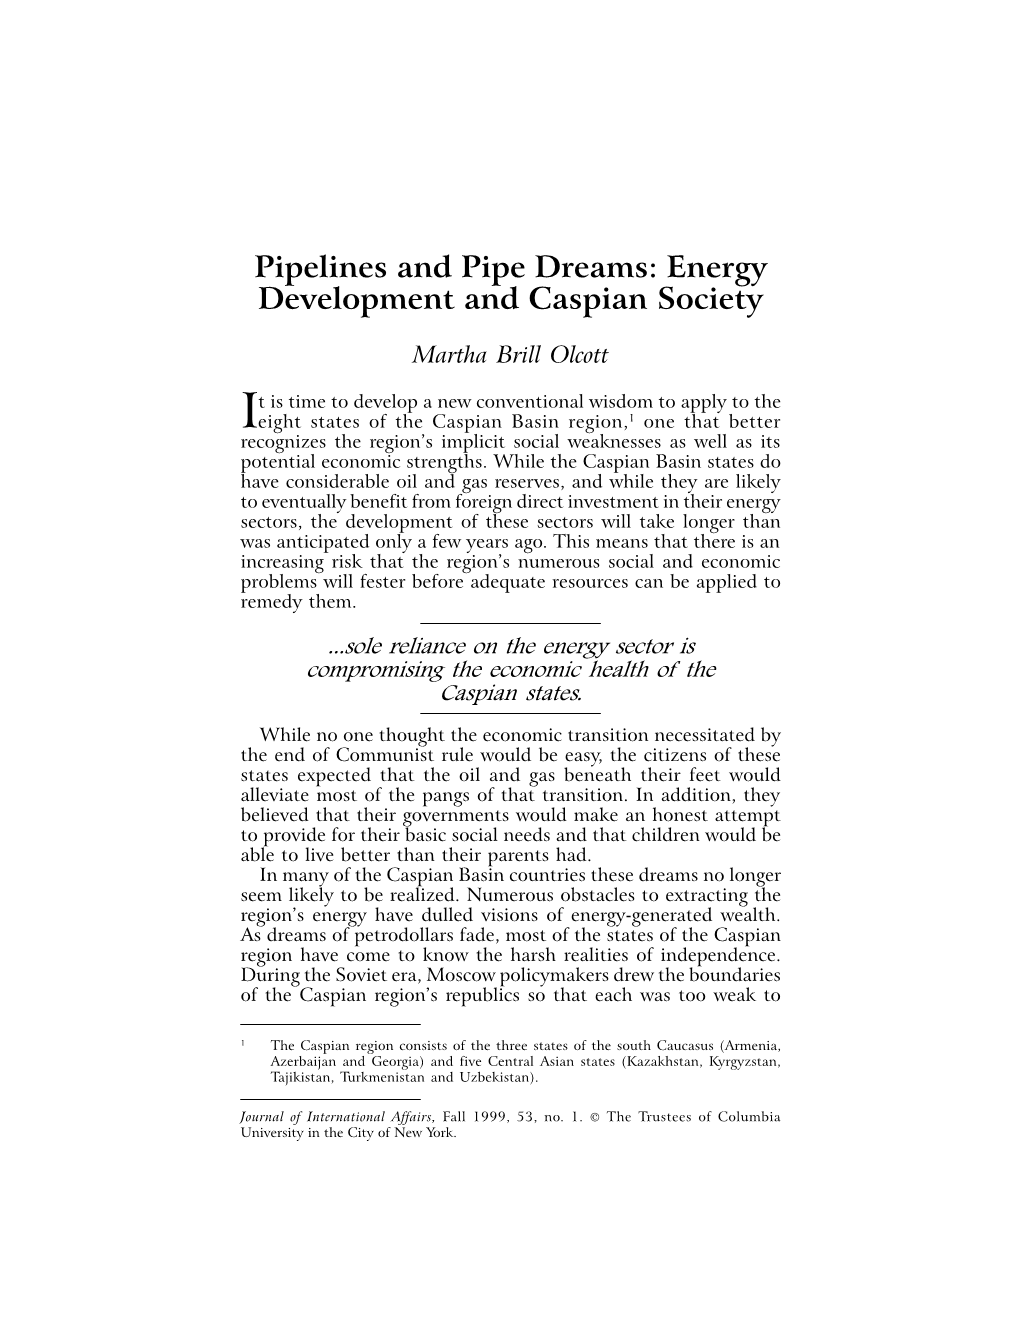 Pipelines and Pipe Dreams: Energy Development and Caspian Society